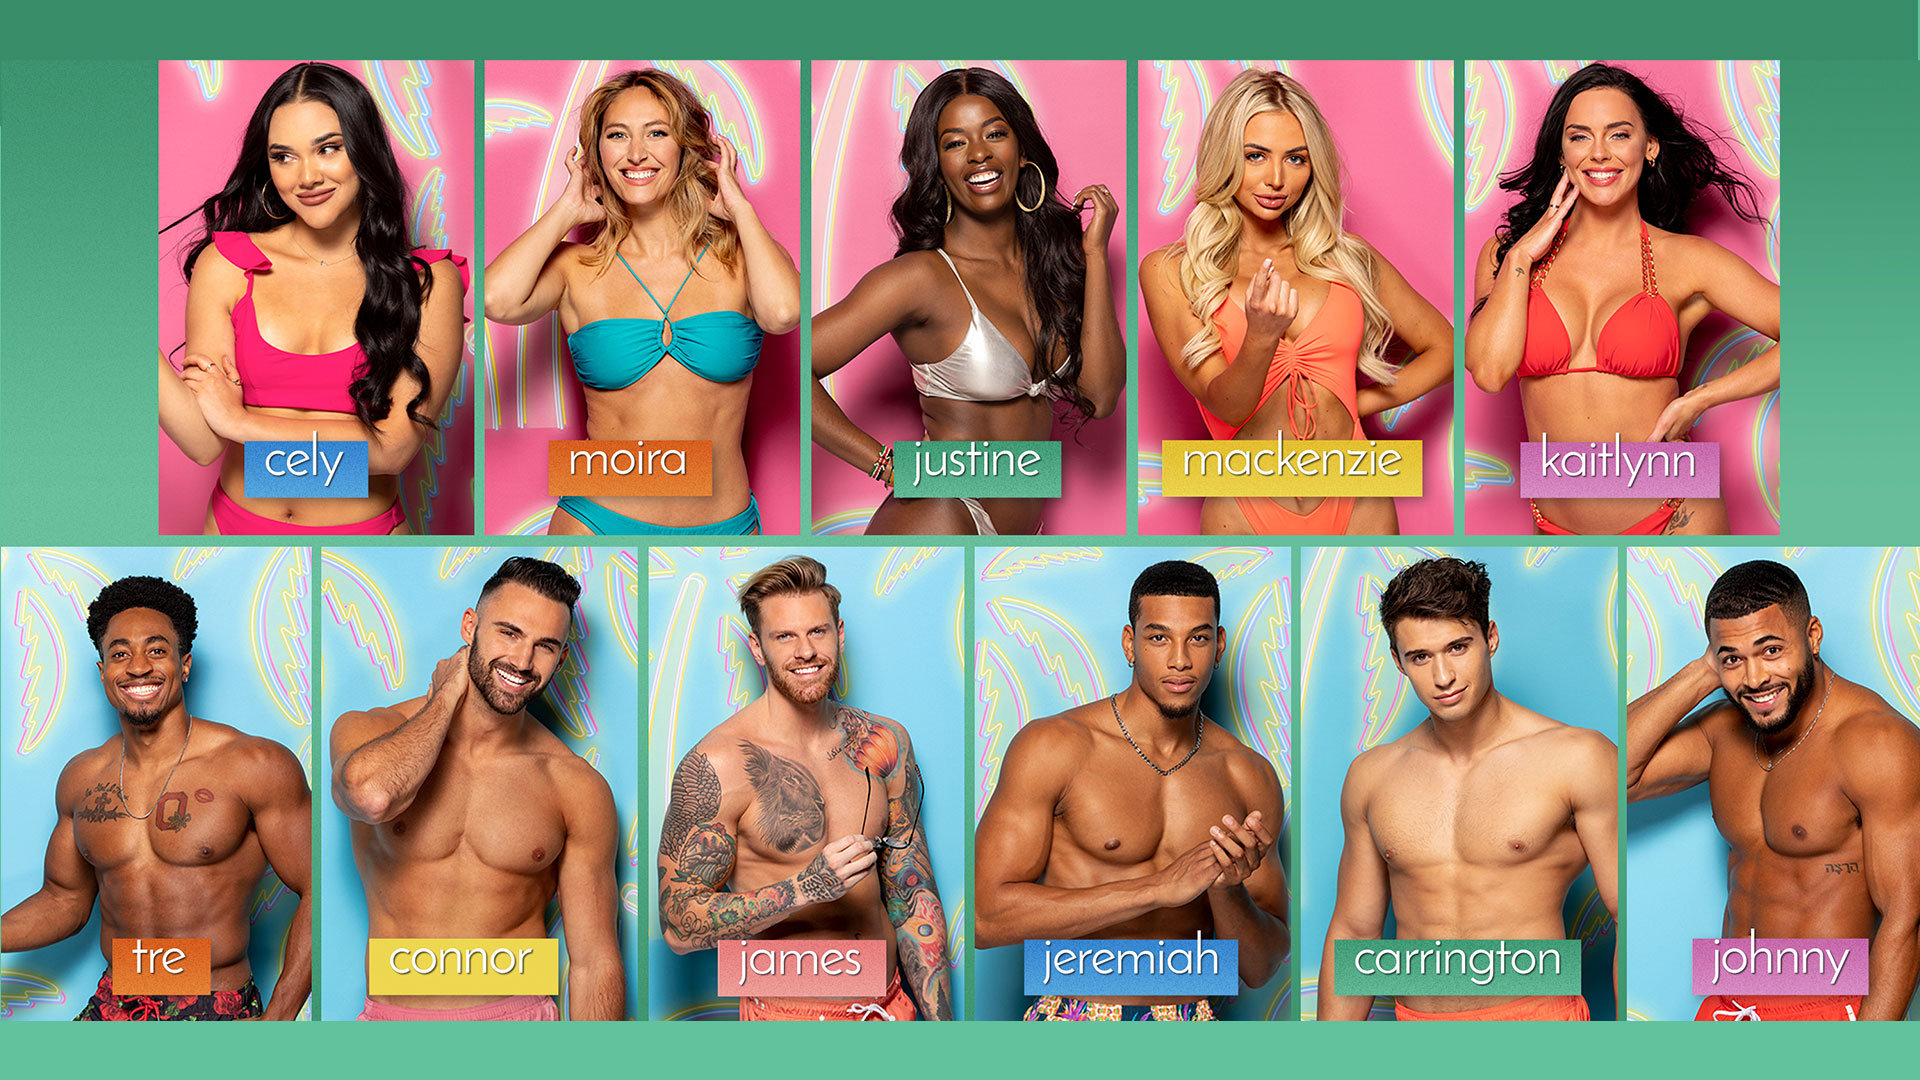 bad movies and shows  - Love Island